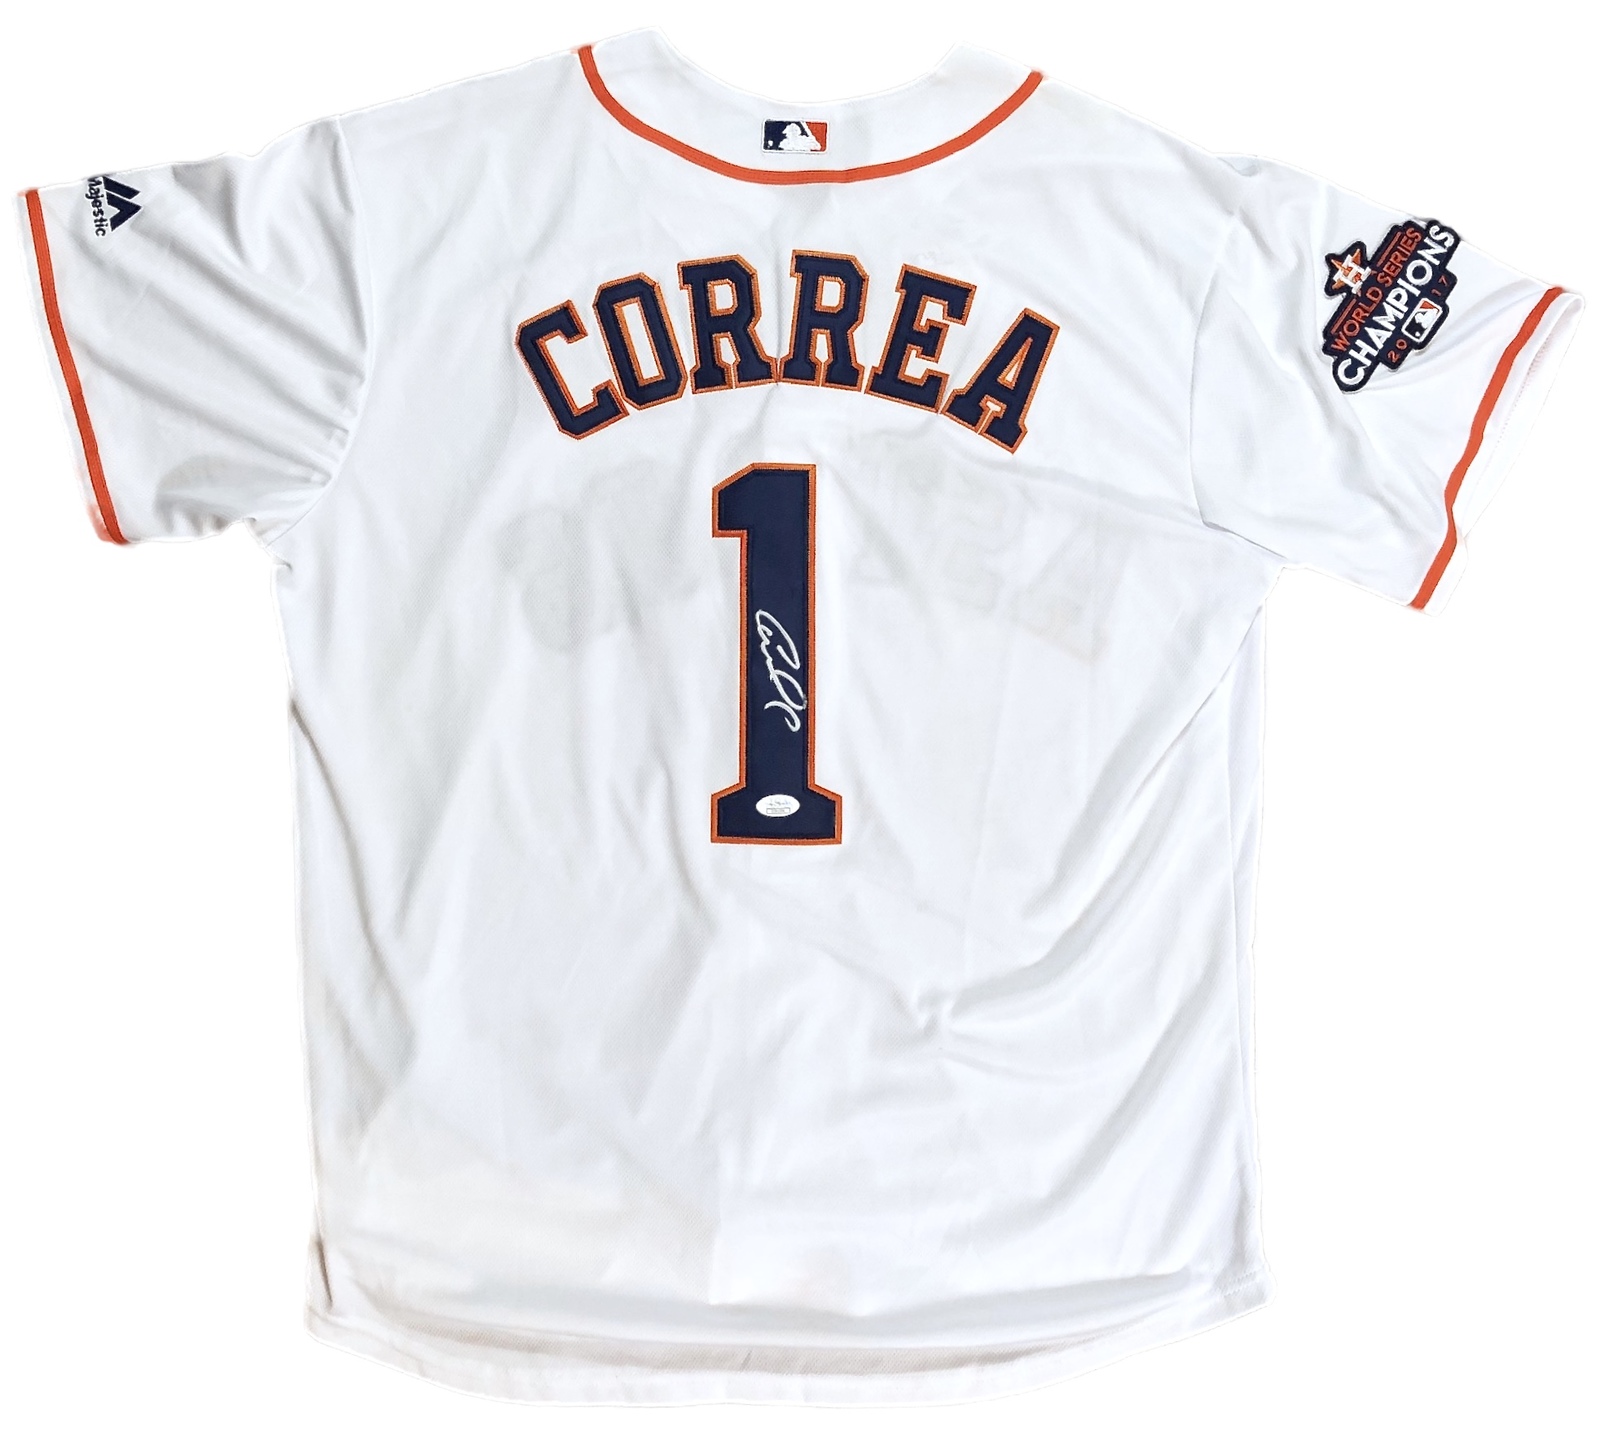 Primary image for CARLOS CORREA SIGNED Autographed Houston ASTROS W.S. 2017 JERSEY JSA CERTIFIED